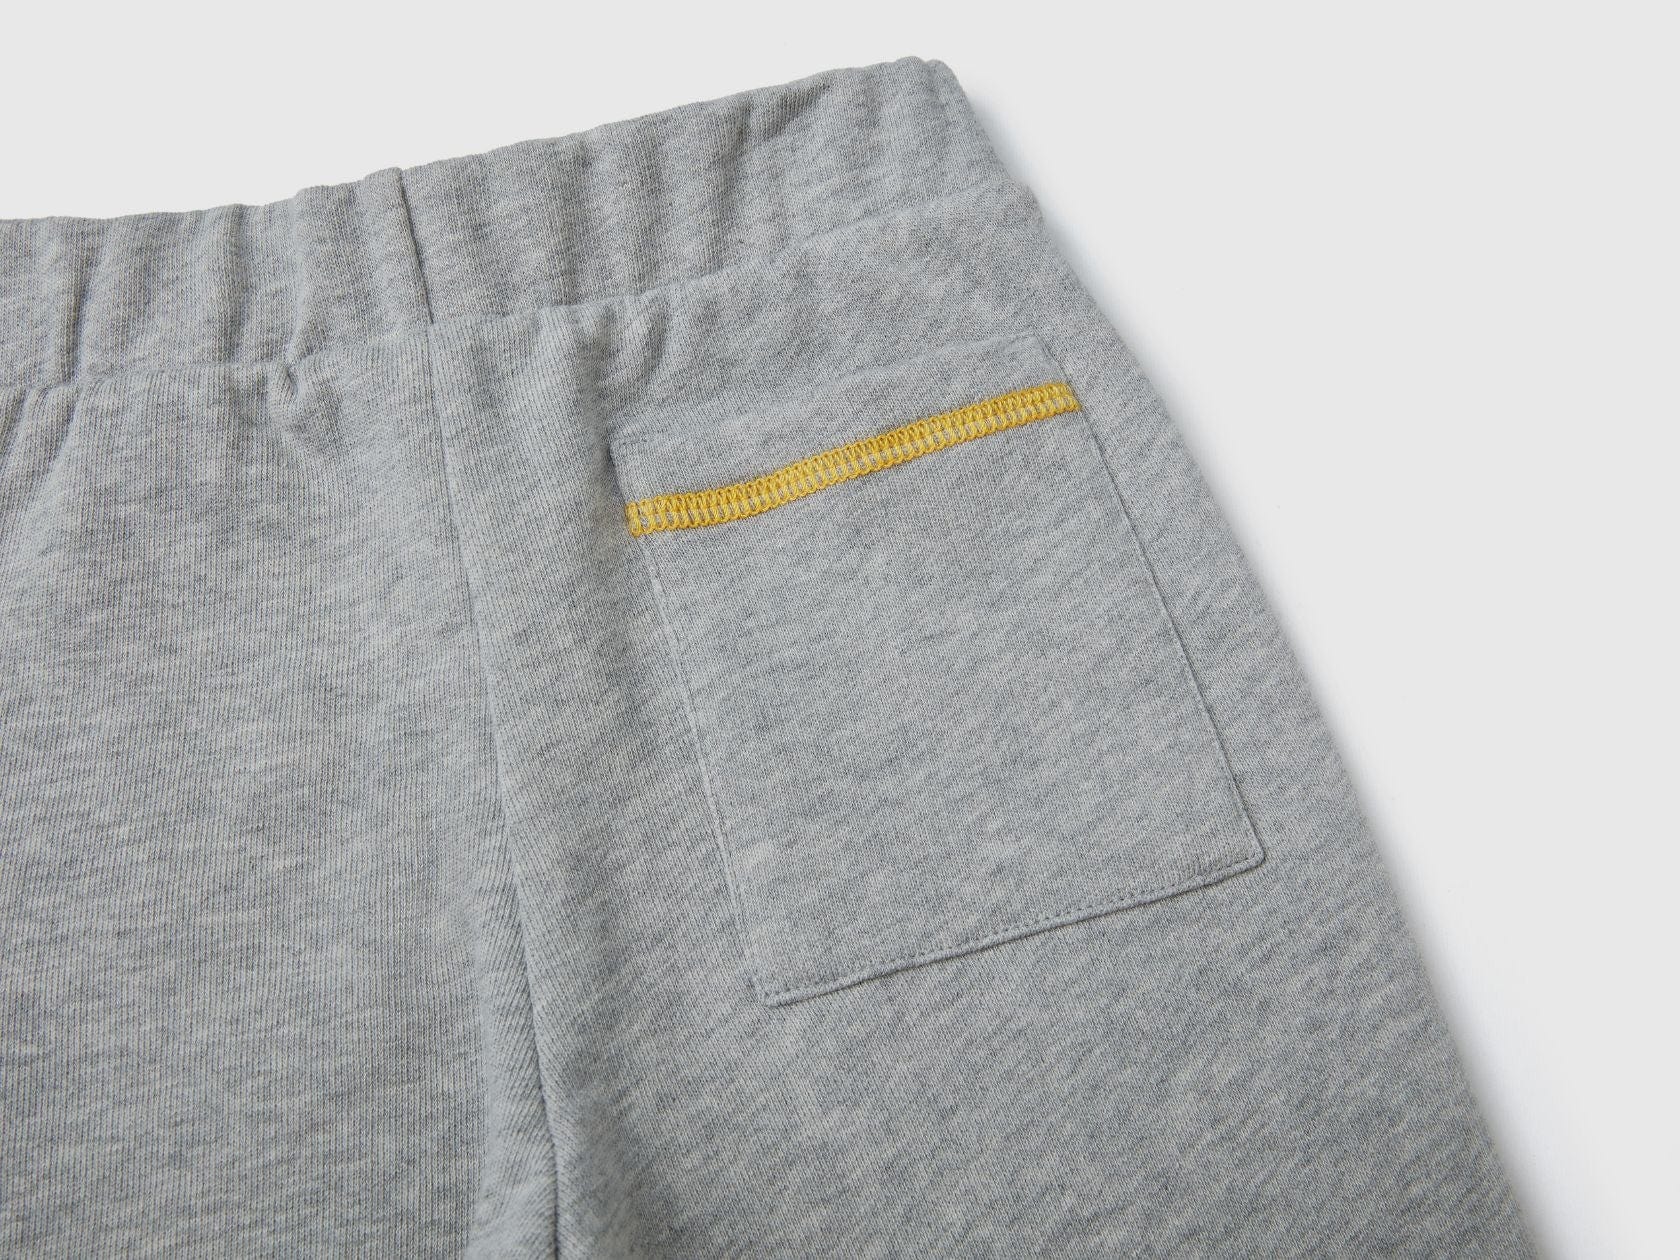 Sweat tracksuit in 100% cotton